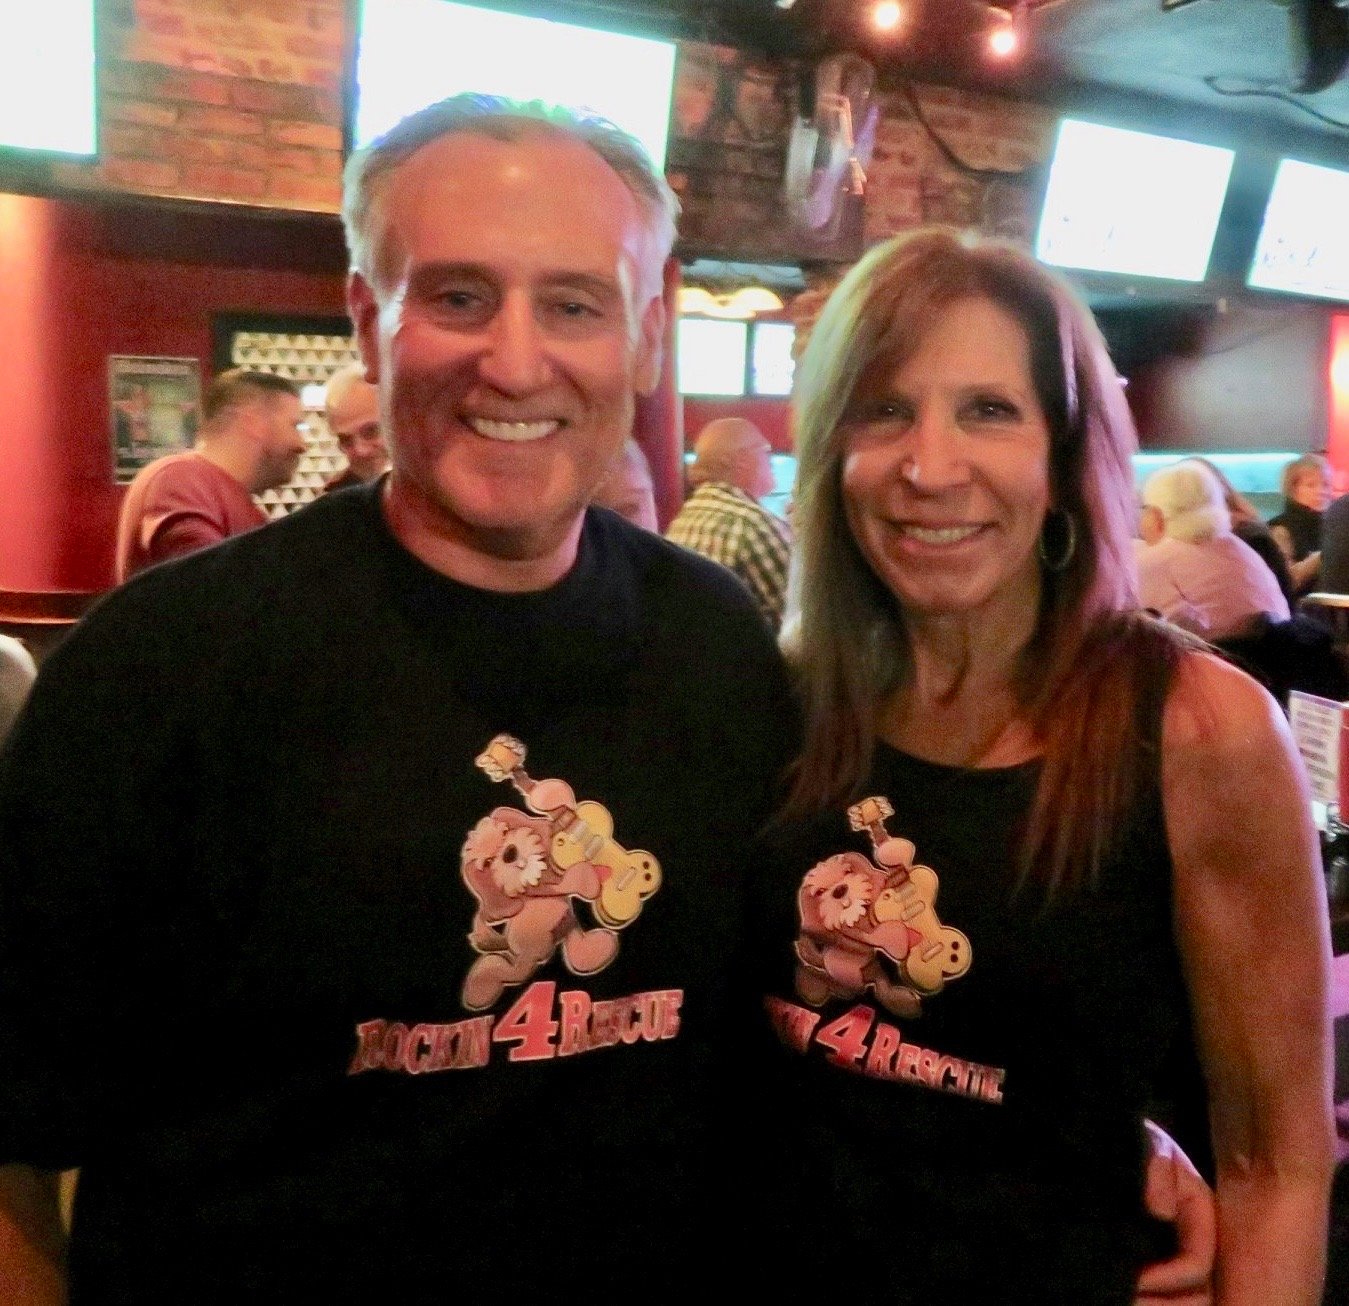 Curt and Bobbie Arnel, of Merrick, founded the nonprofit Rockin 4 Rescue in 2017, to collect and donate money to rescue organizations on Long Island. Its third annual benefit concert is scheduled for the end of the month.